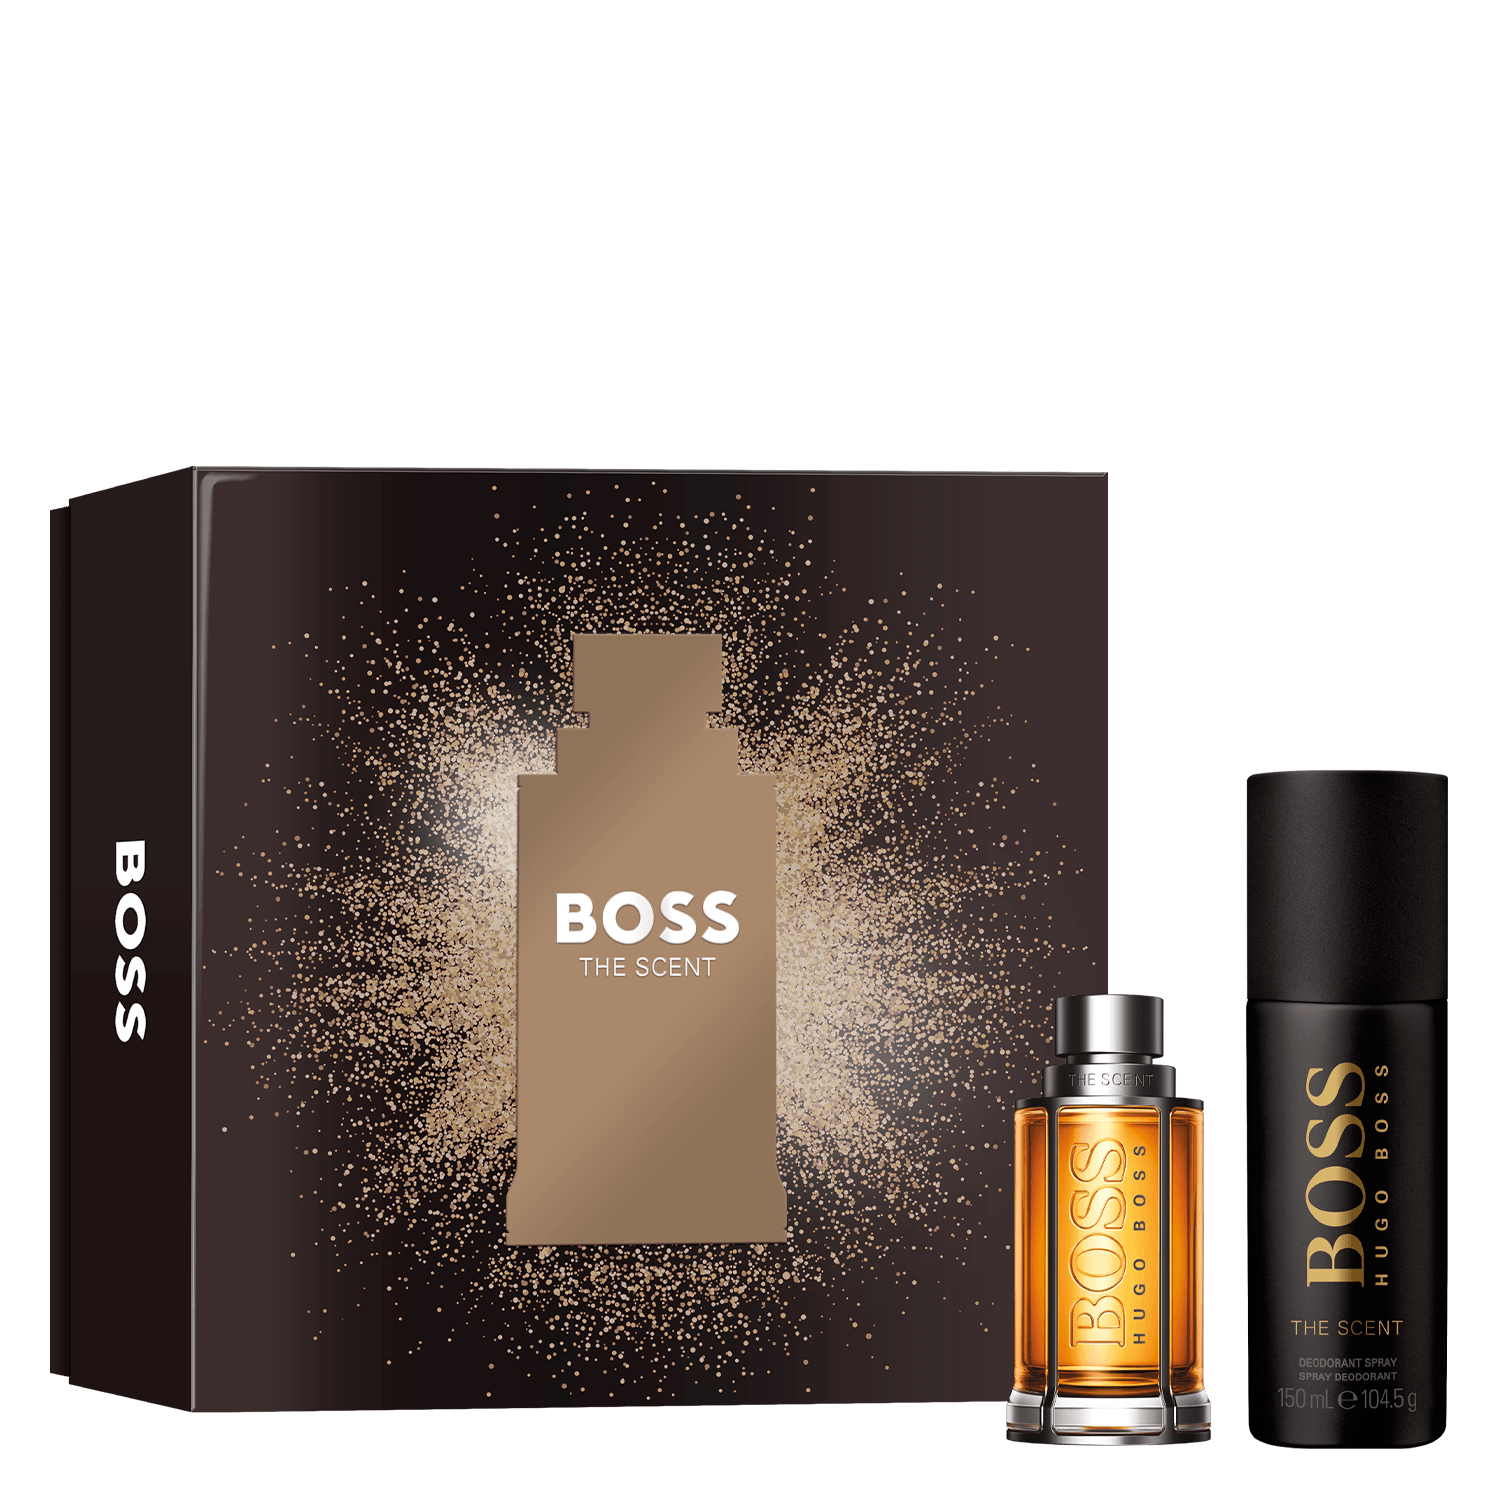 Product image from Boss The Scent - Eau de Toilette for Him KIt